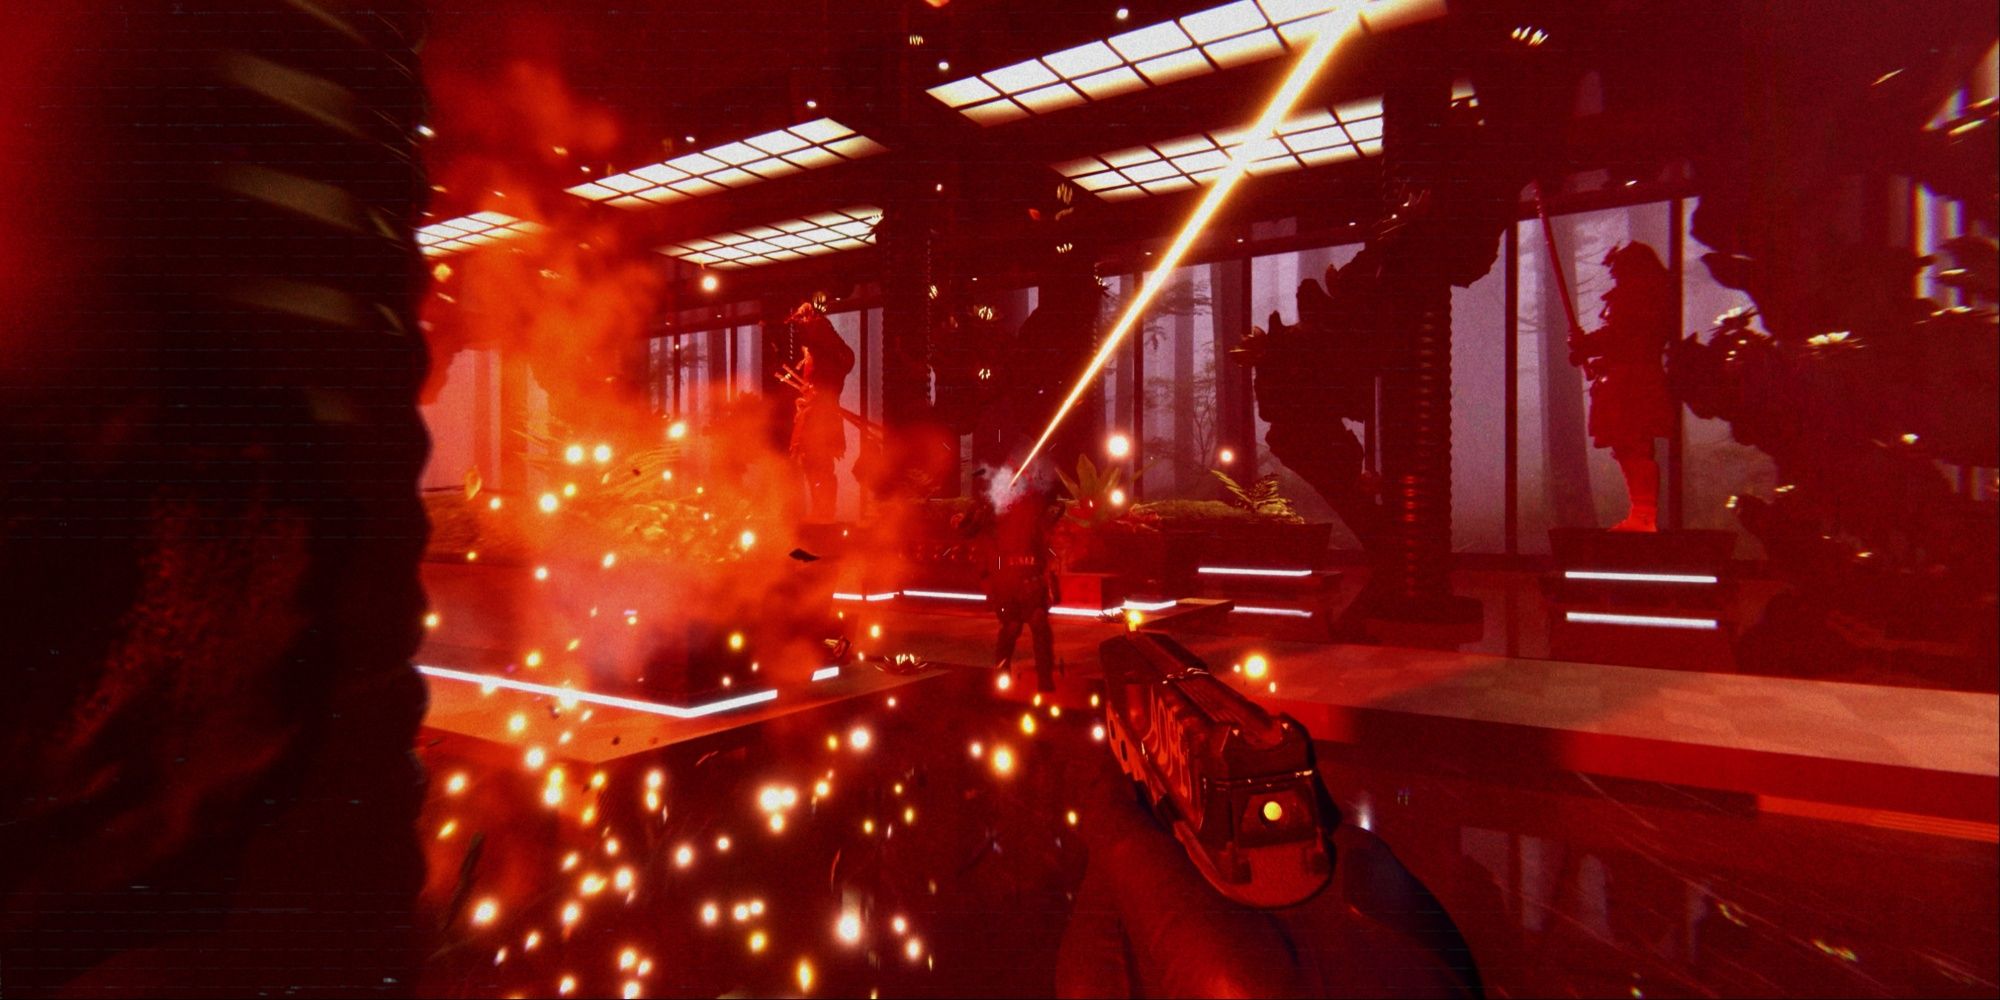 Den of Wolves FPS gameplay in a futuristic red room